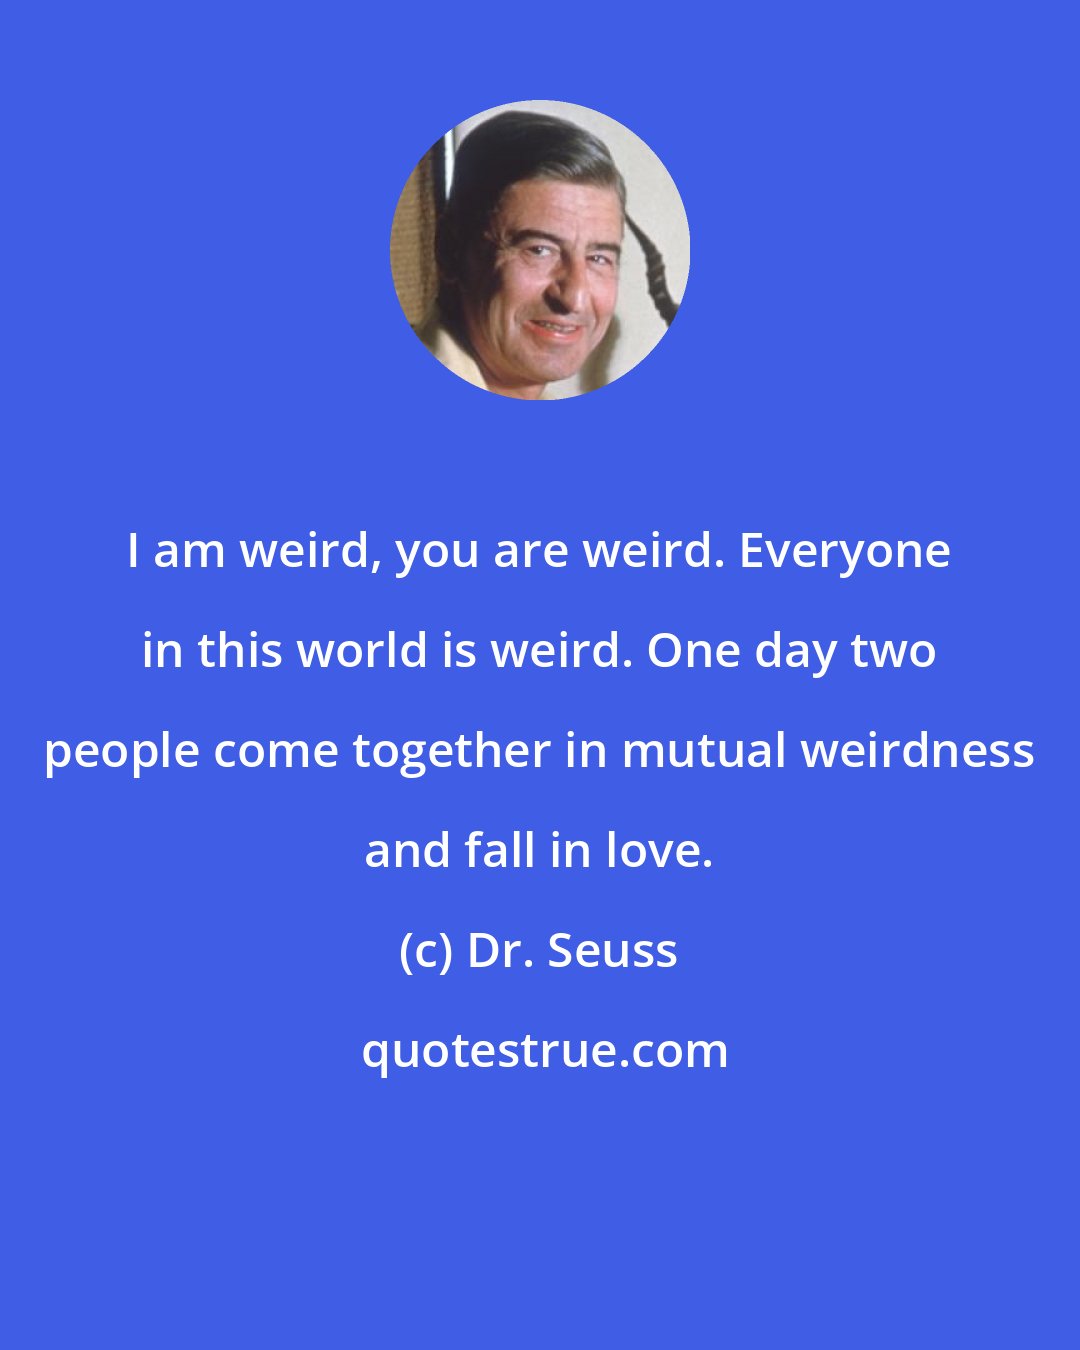 Dr. Seuss: I am weird, you are weird. Everyone in this world is weird. One day two people come together in mutual weirdness and fall in love.